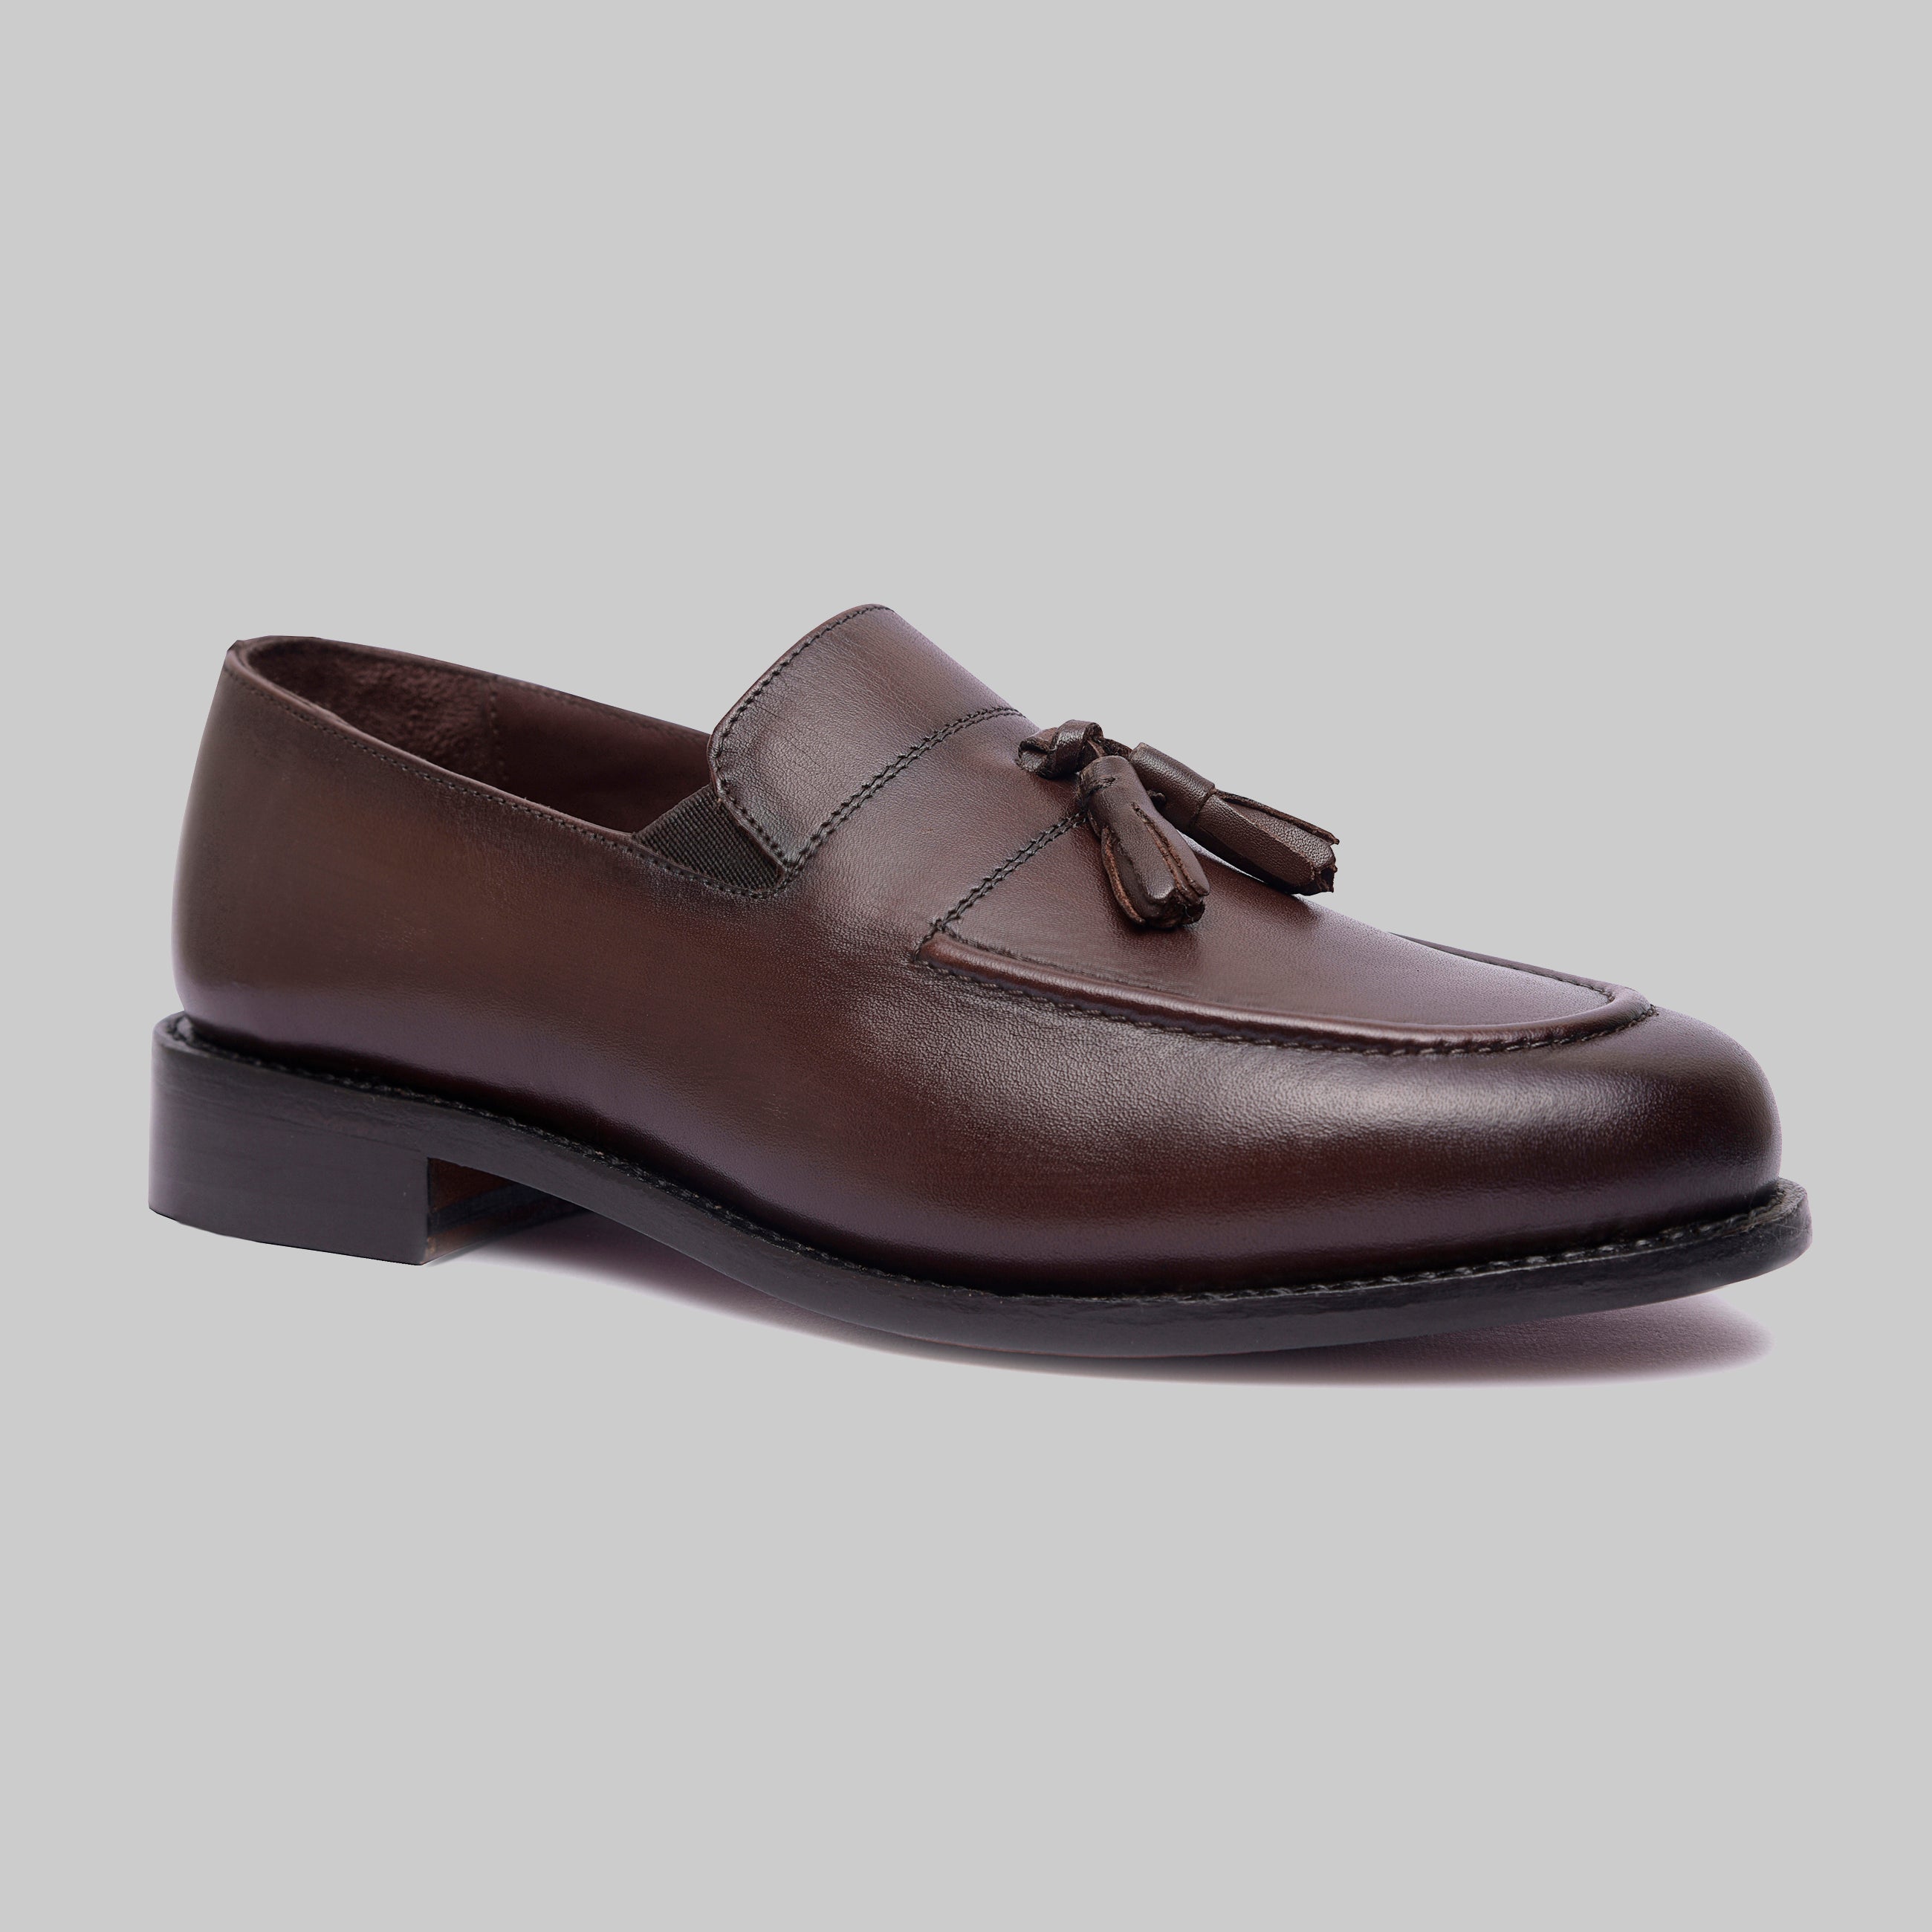 Jager Goodyear Welted Formal Tassel Penny Loafers